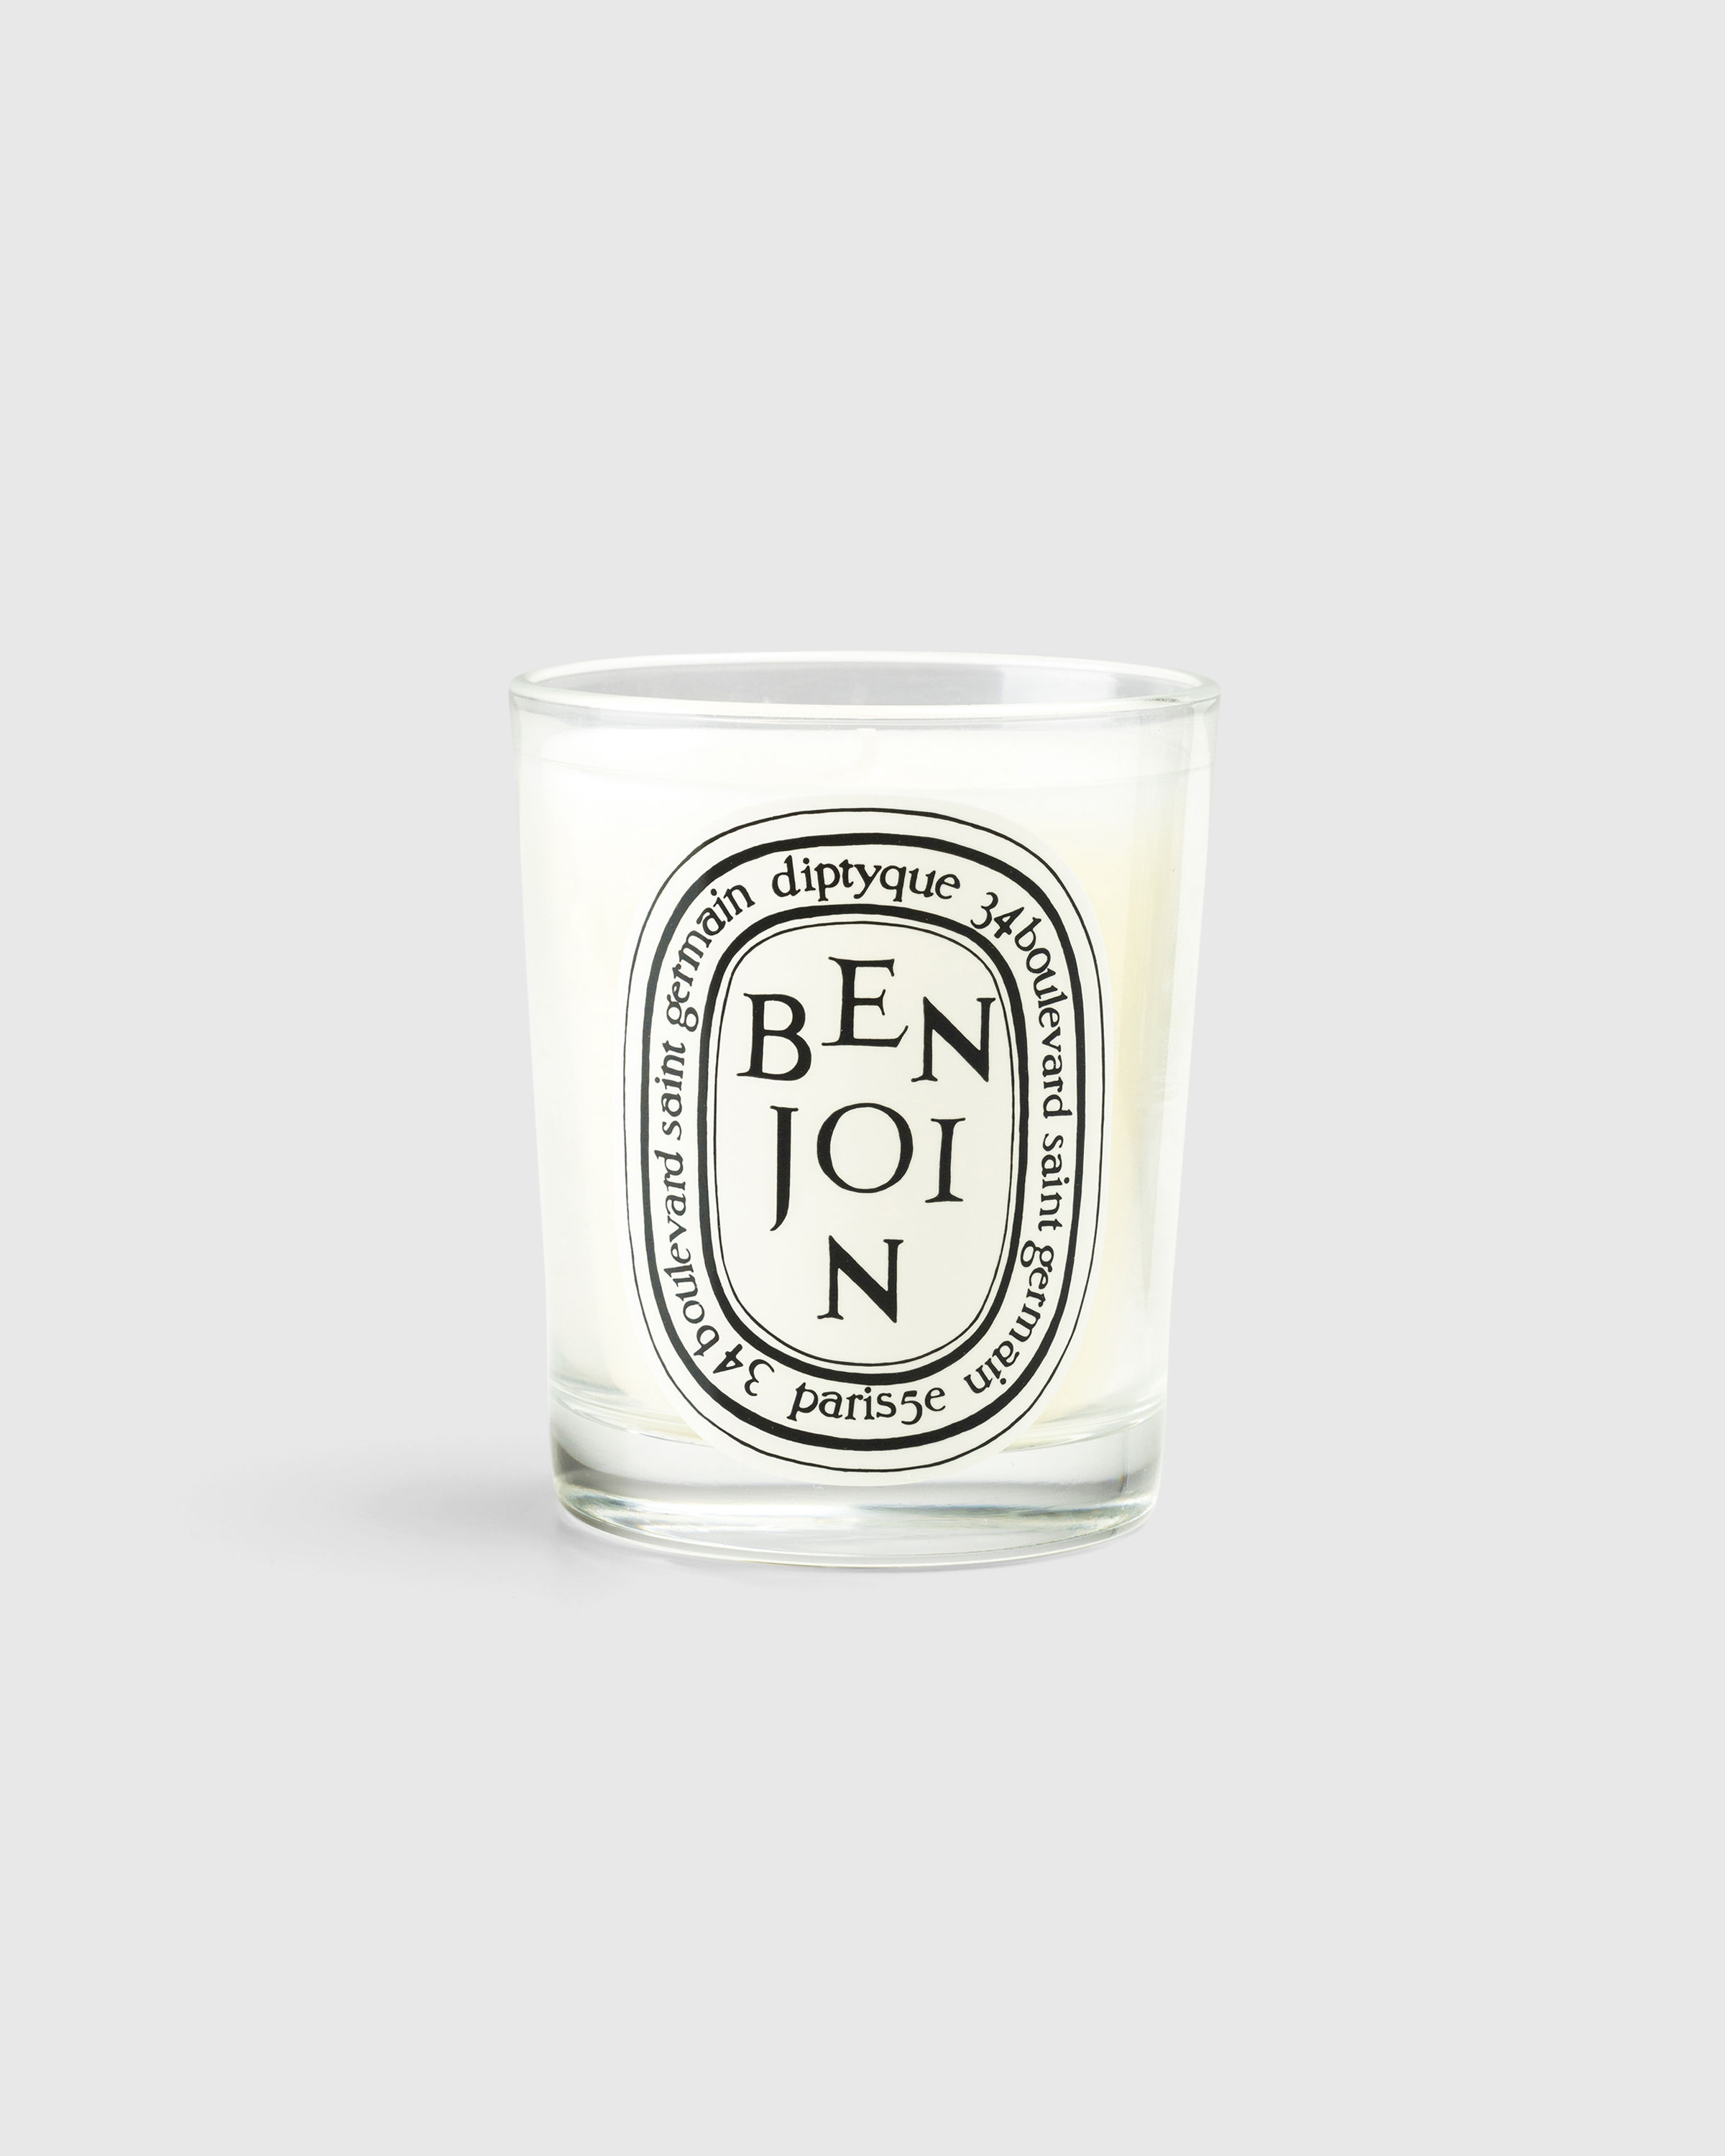 Diptyque – Standard Candle Benjoin 190g - Candles & Fragrances - White - Image 1